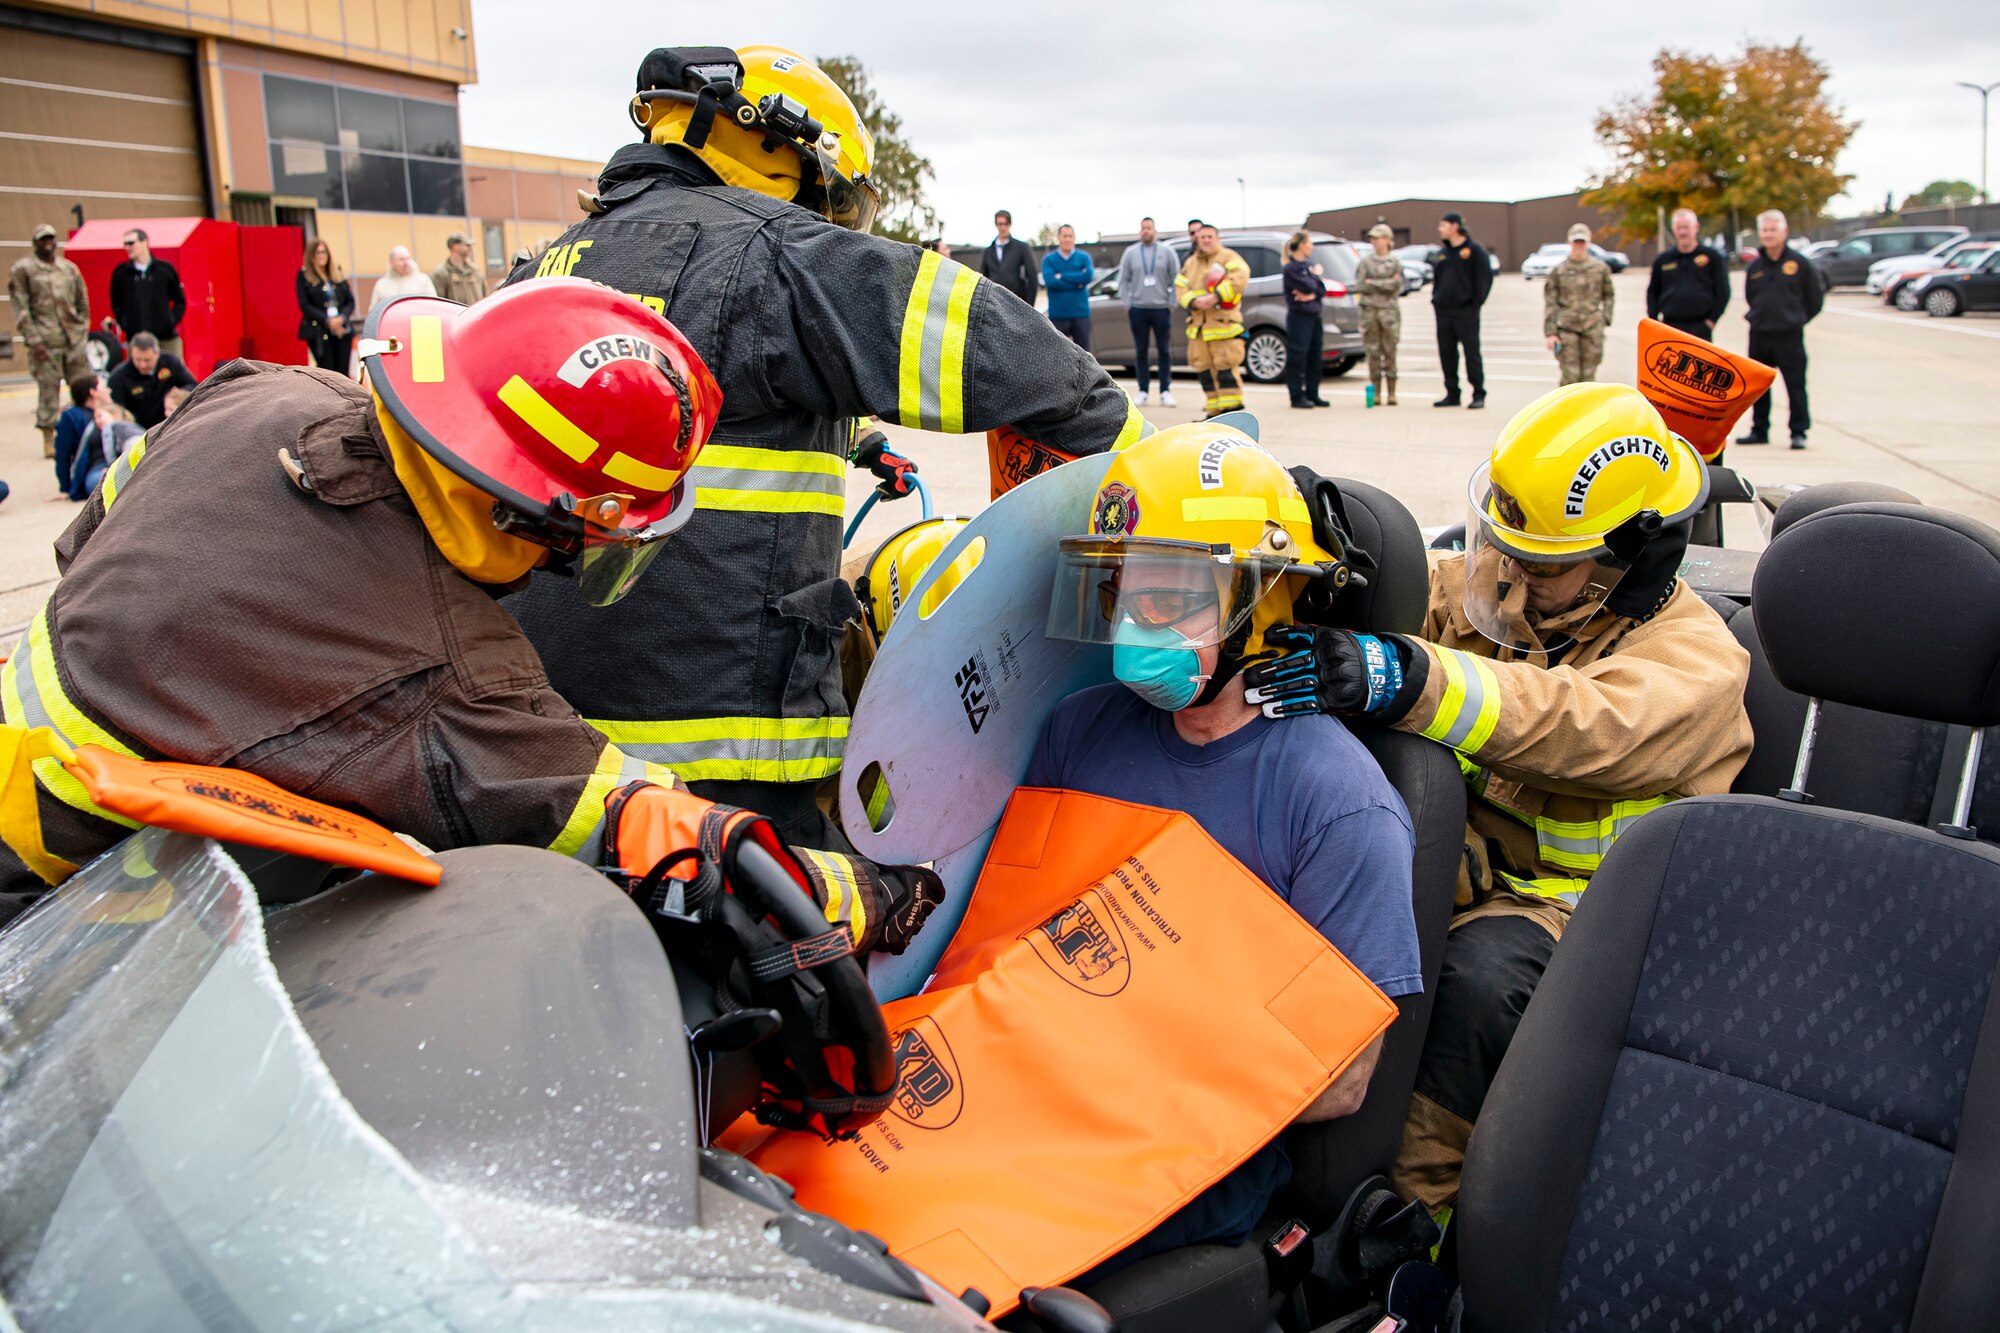 Firefighters from the 423d Civil Engineer Squadron, attempt to remove a simulated victim during a rescue demonstration at RAF Alconbury, England, Oct. 12, 2022. The demonstration was part of Fire Prevention Week in which firefighters from the 423d CES educated Airmen and dependents on proper fire safety habits. (U.S. Air Force photo by Staff Sgt. Eugene Oliver)